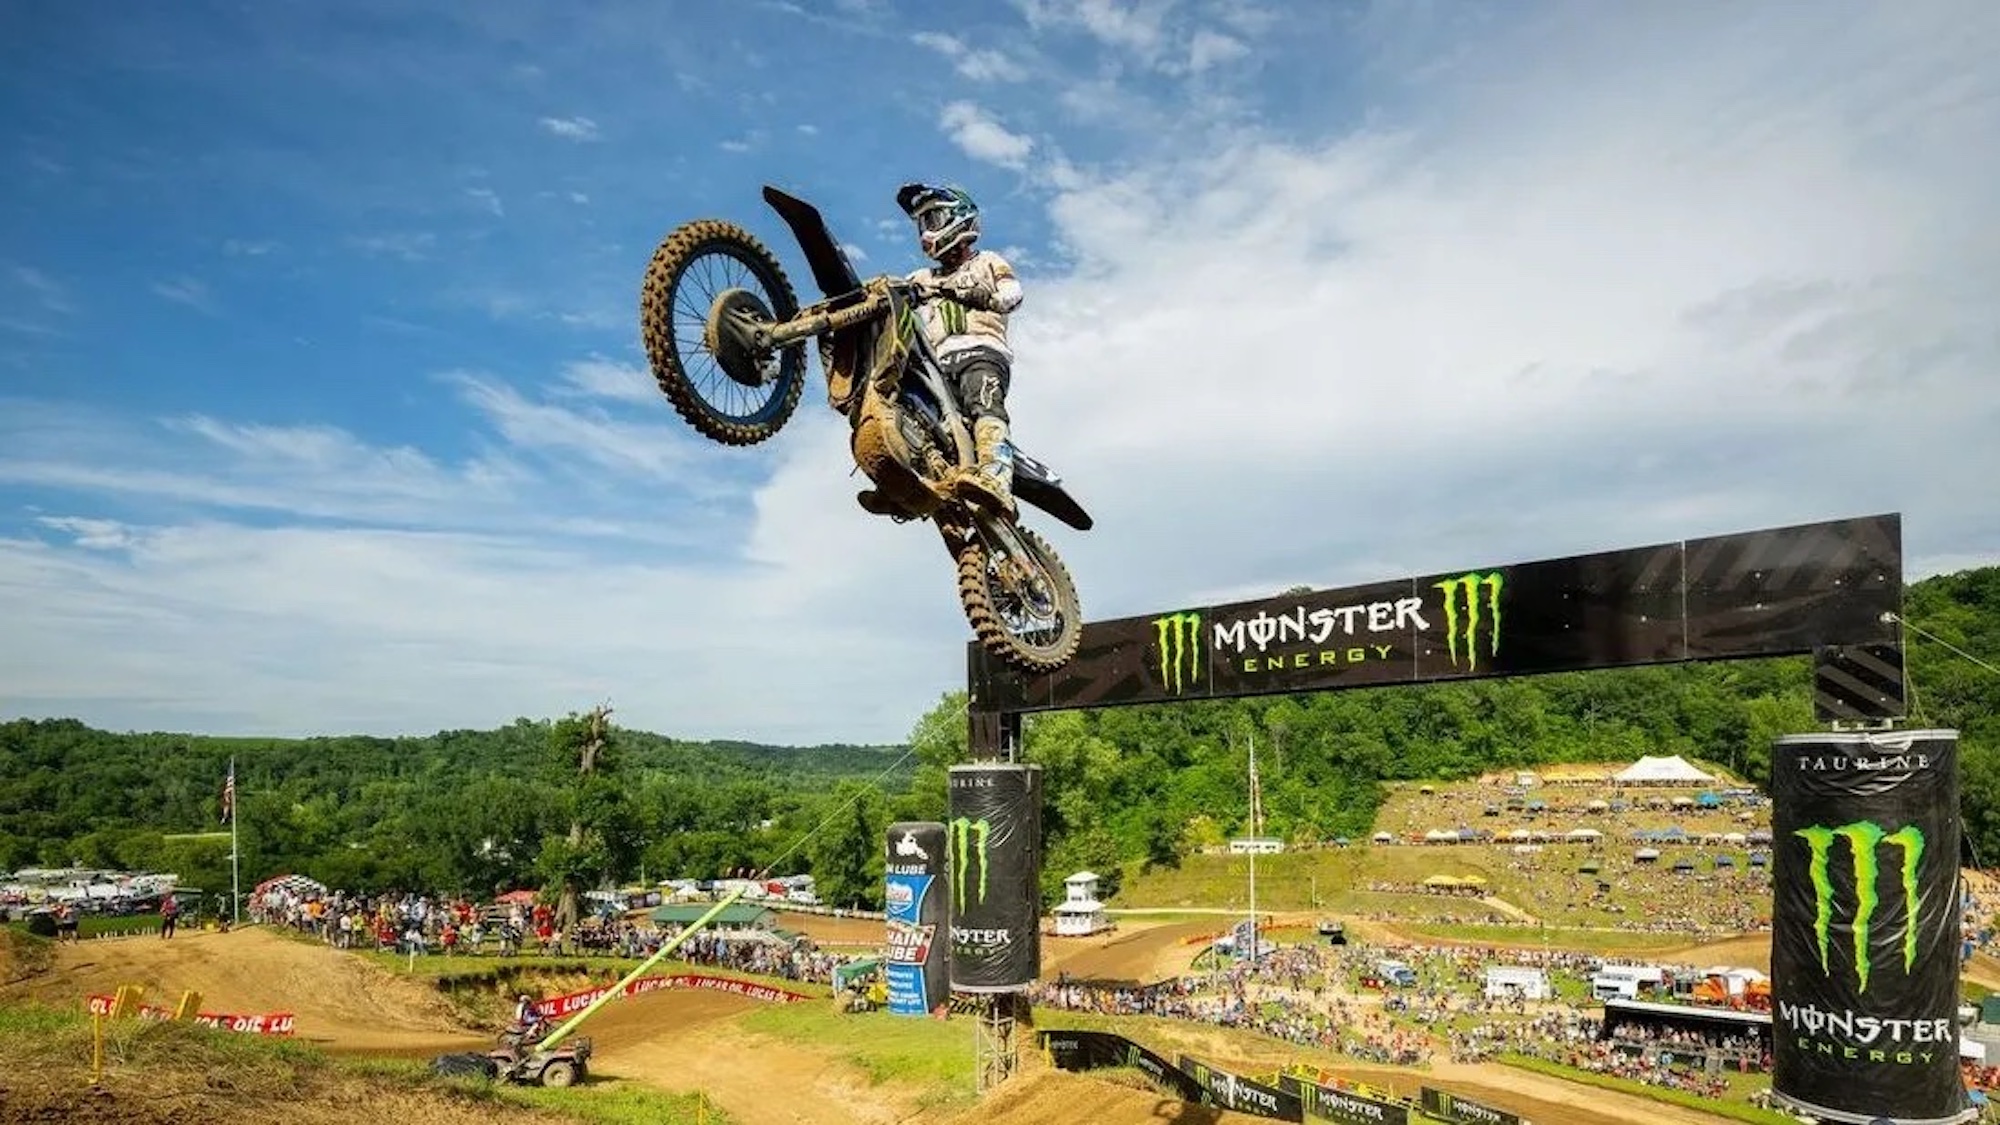 A SX racer doing what he does best. Media sourced from IndyCar.